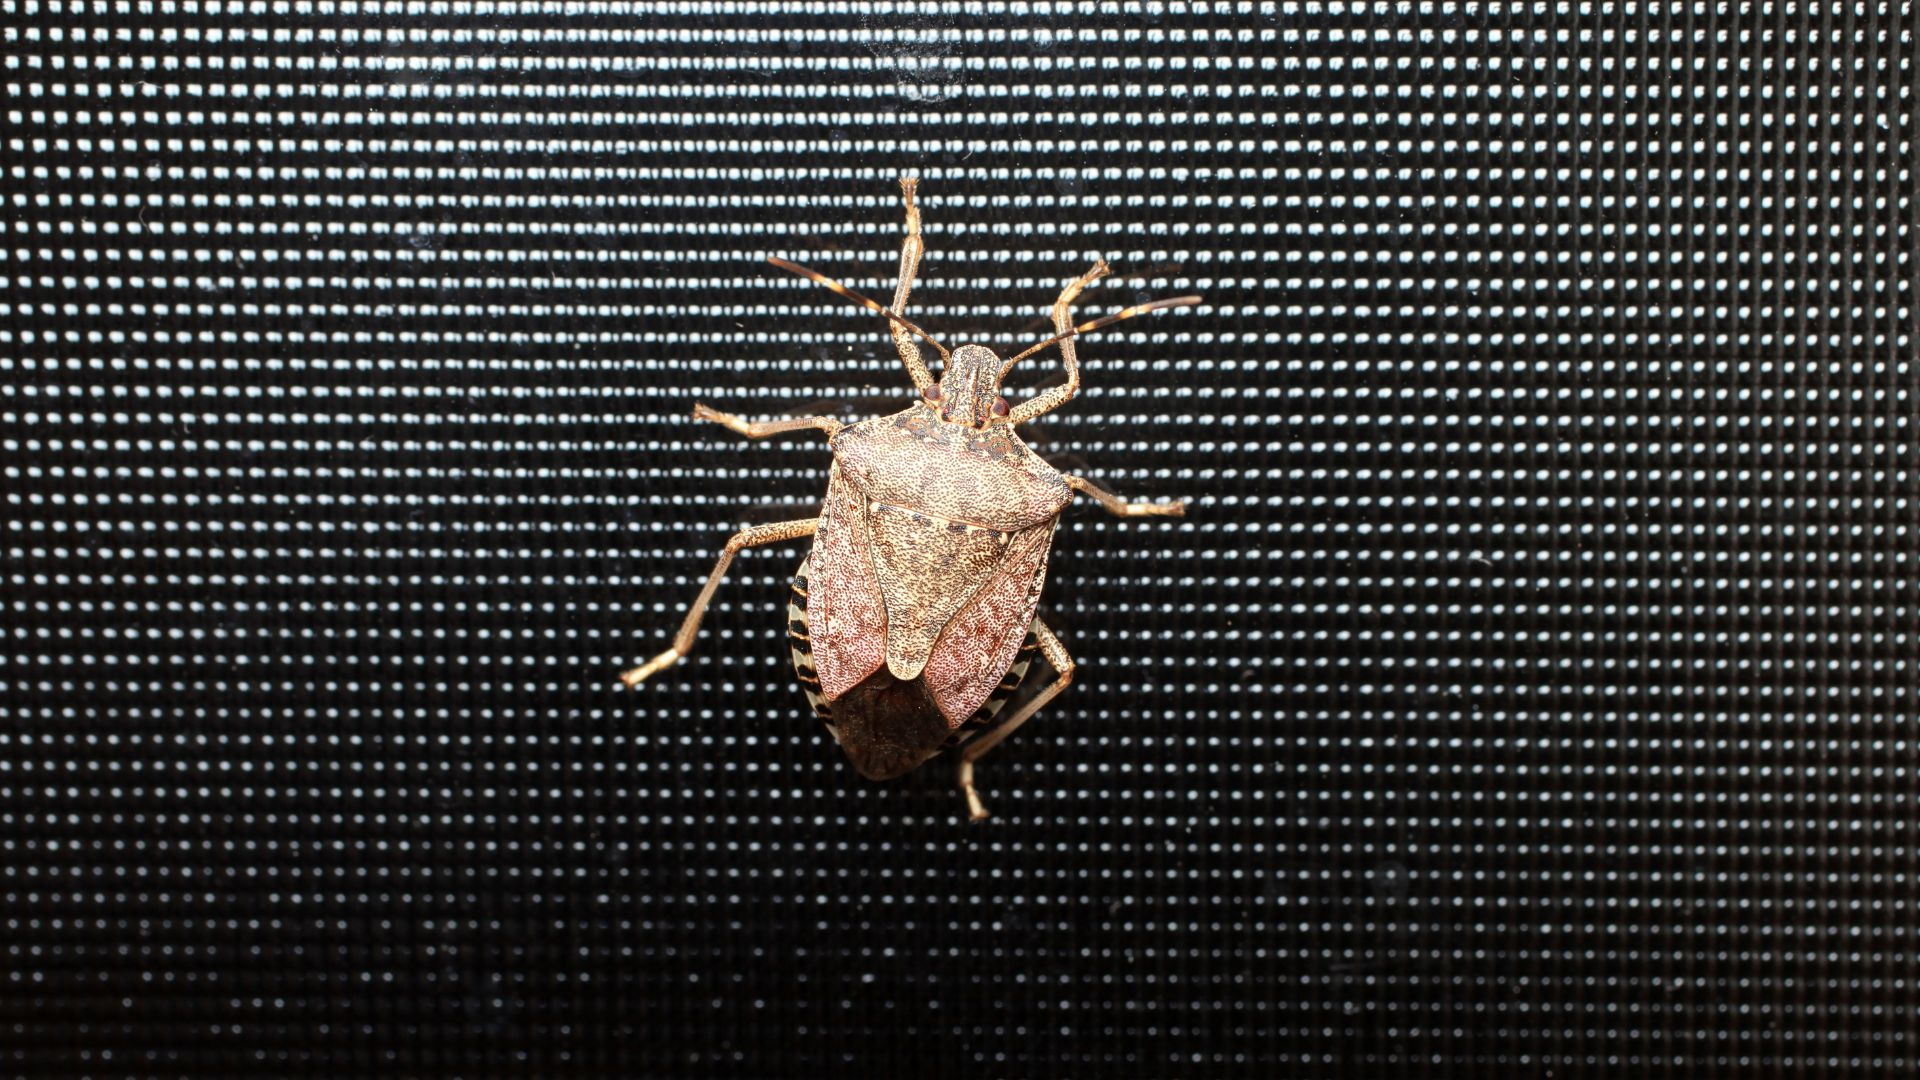 An image of a stink bug on a window screen.